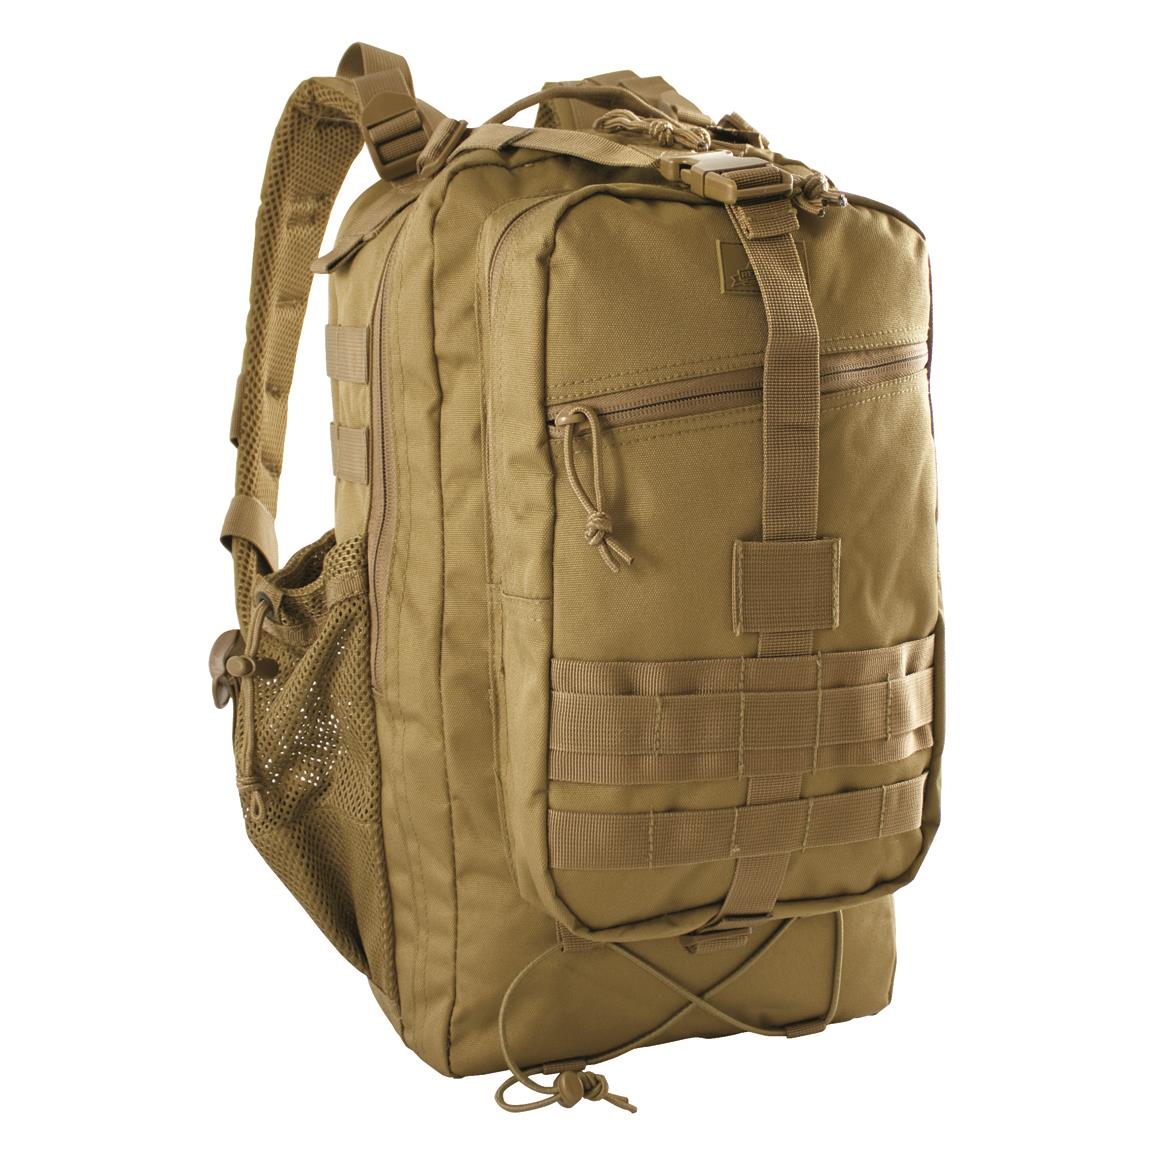 Red Rock Outdoor Gear 20L Summit Pack, Coyote